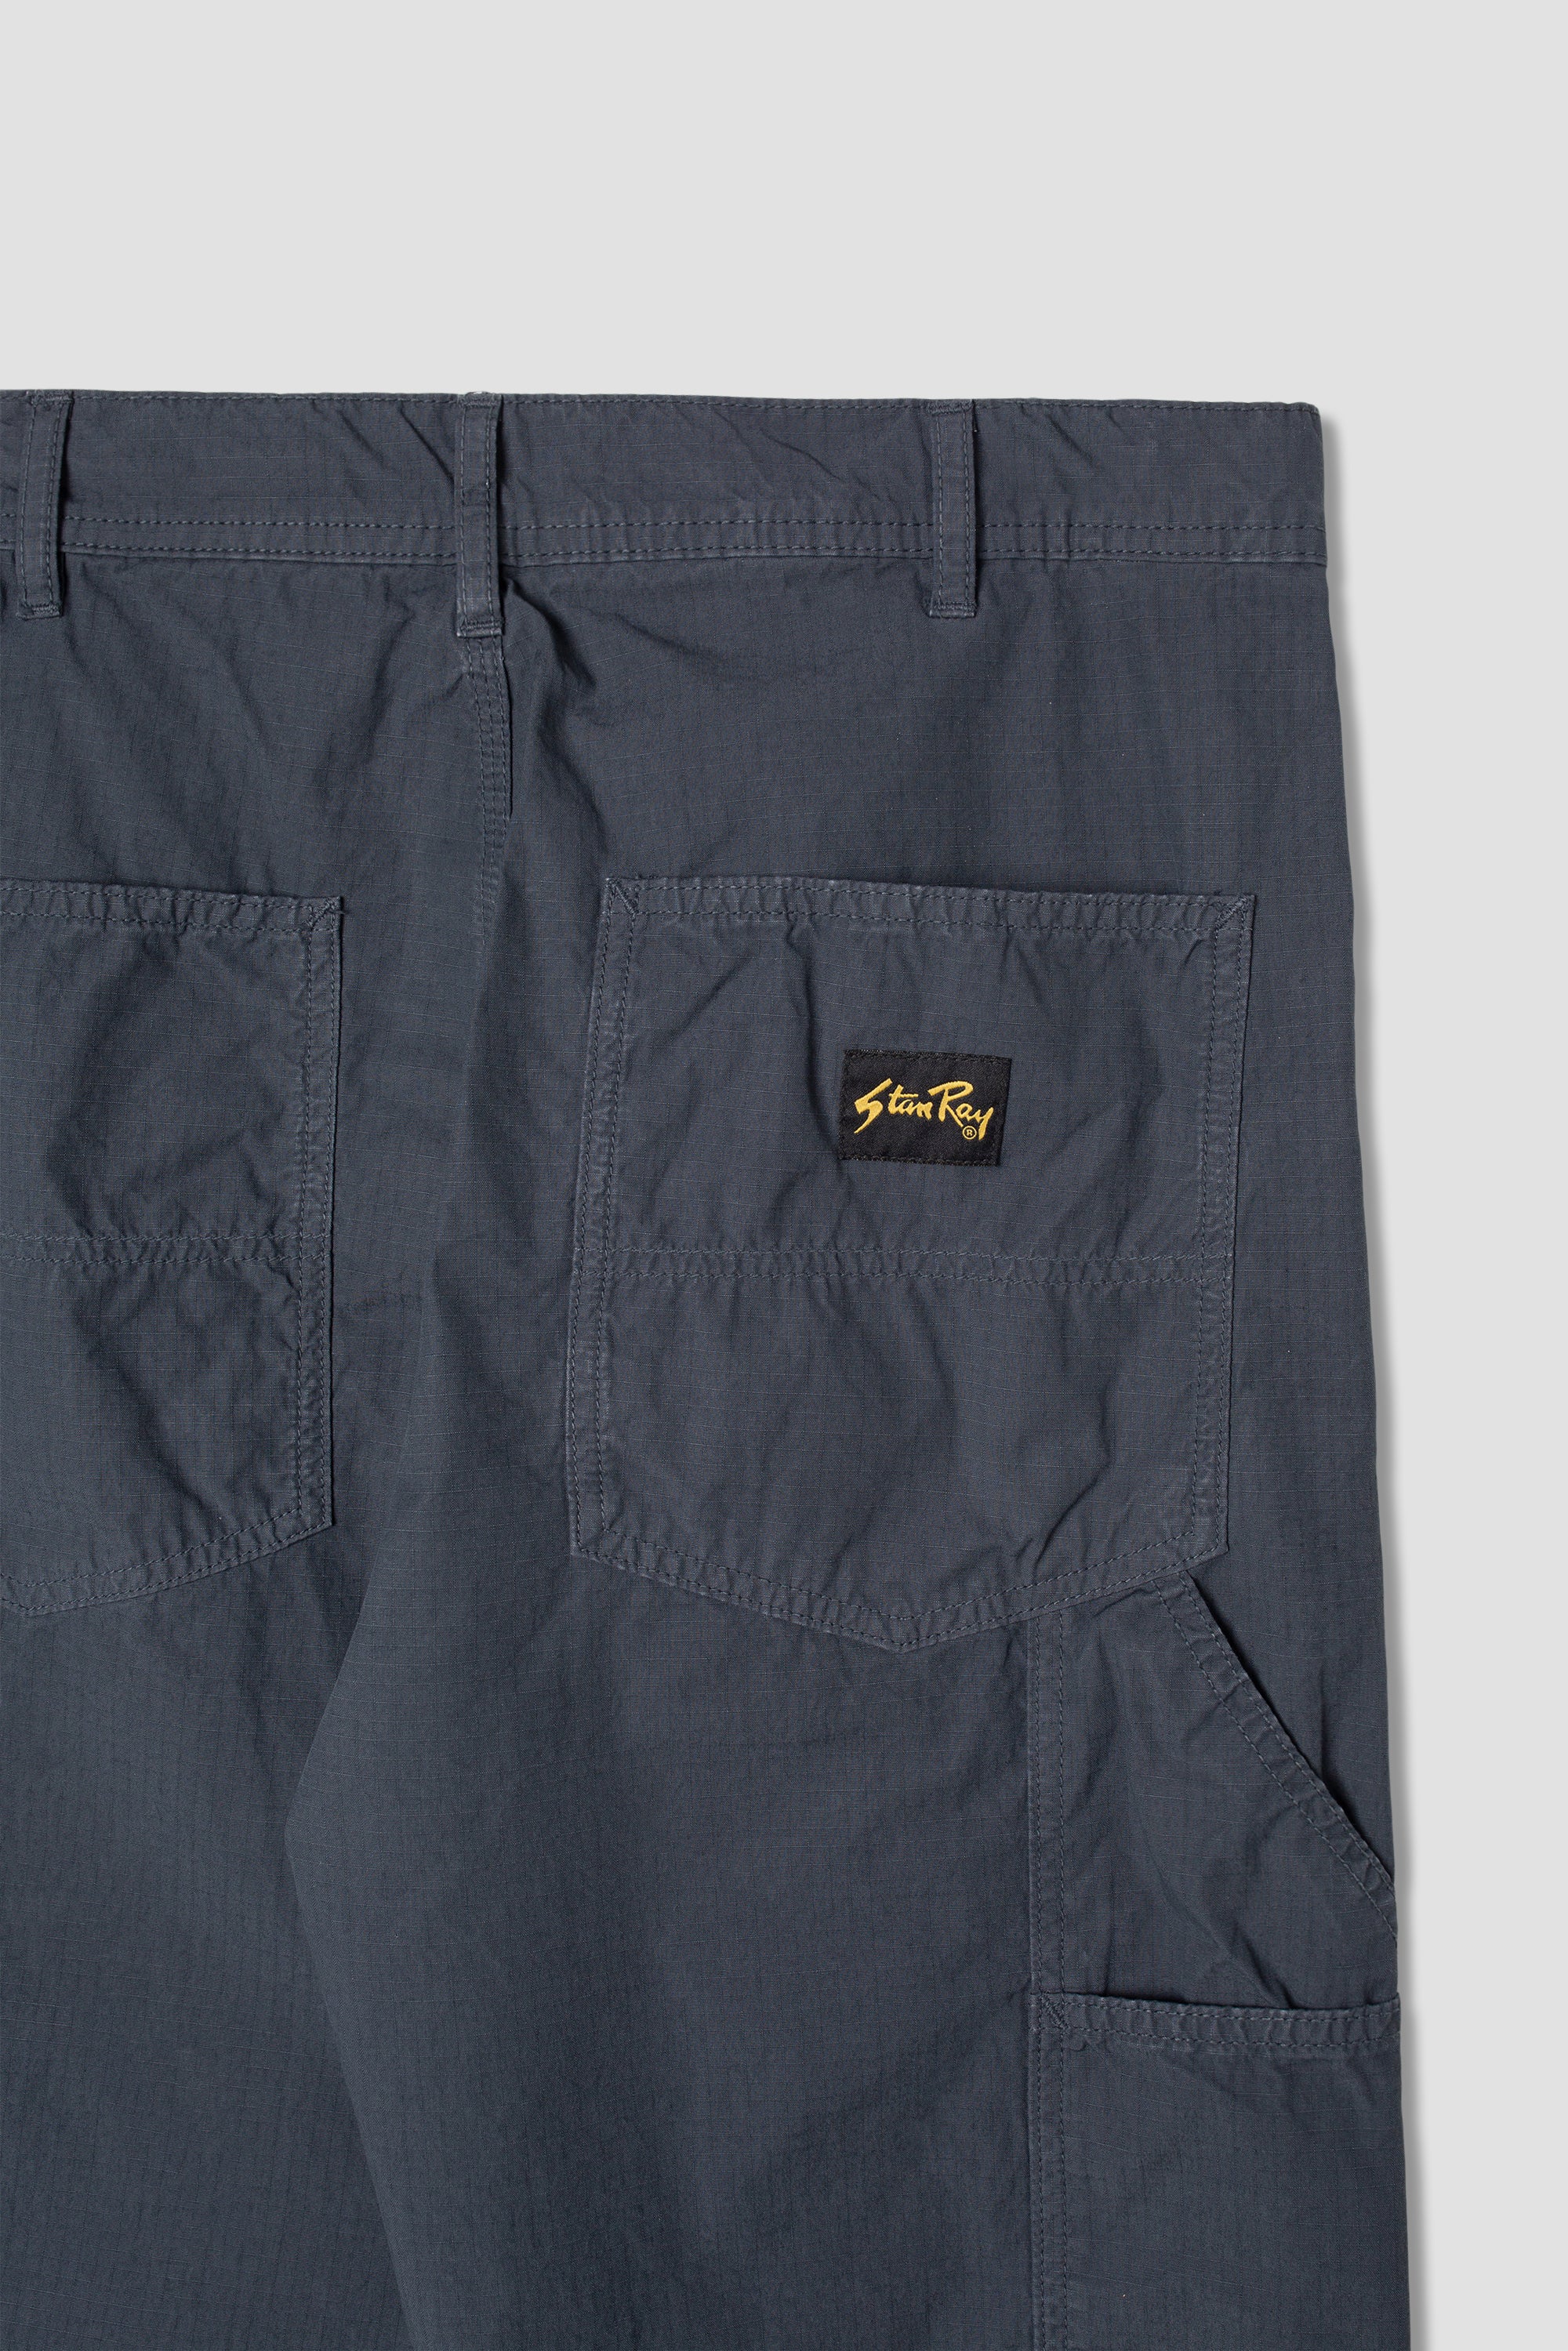 OG Painter Pant (Navy Ripstop) – Stan Ray